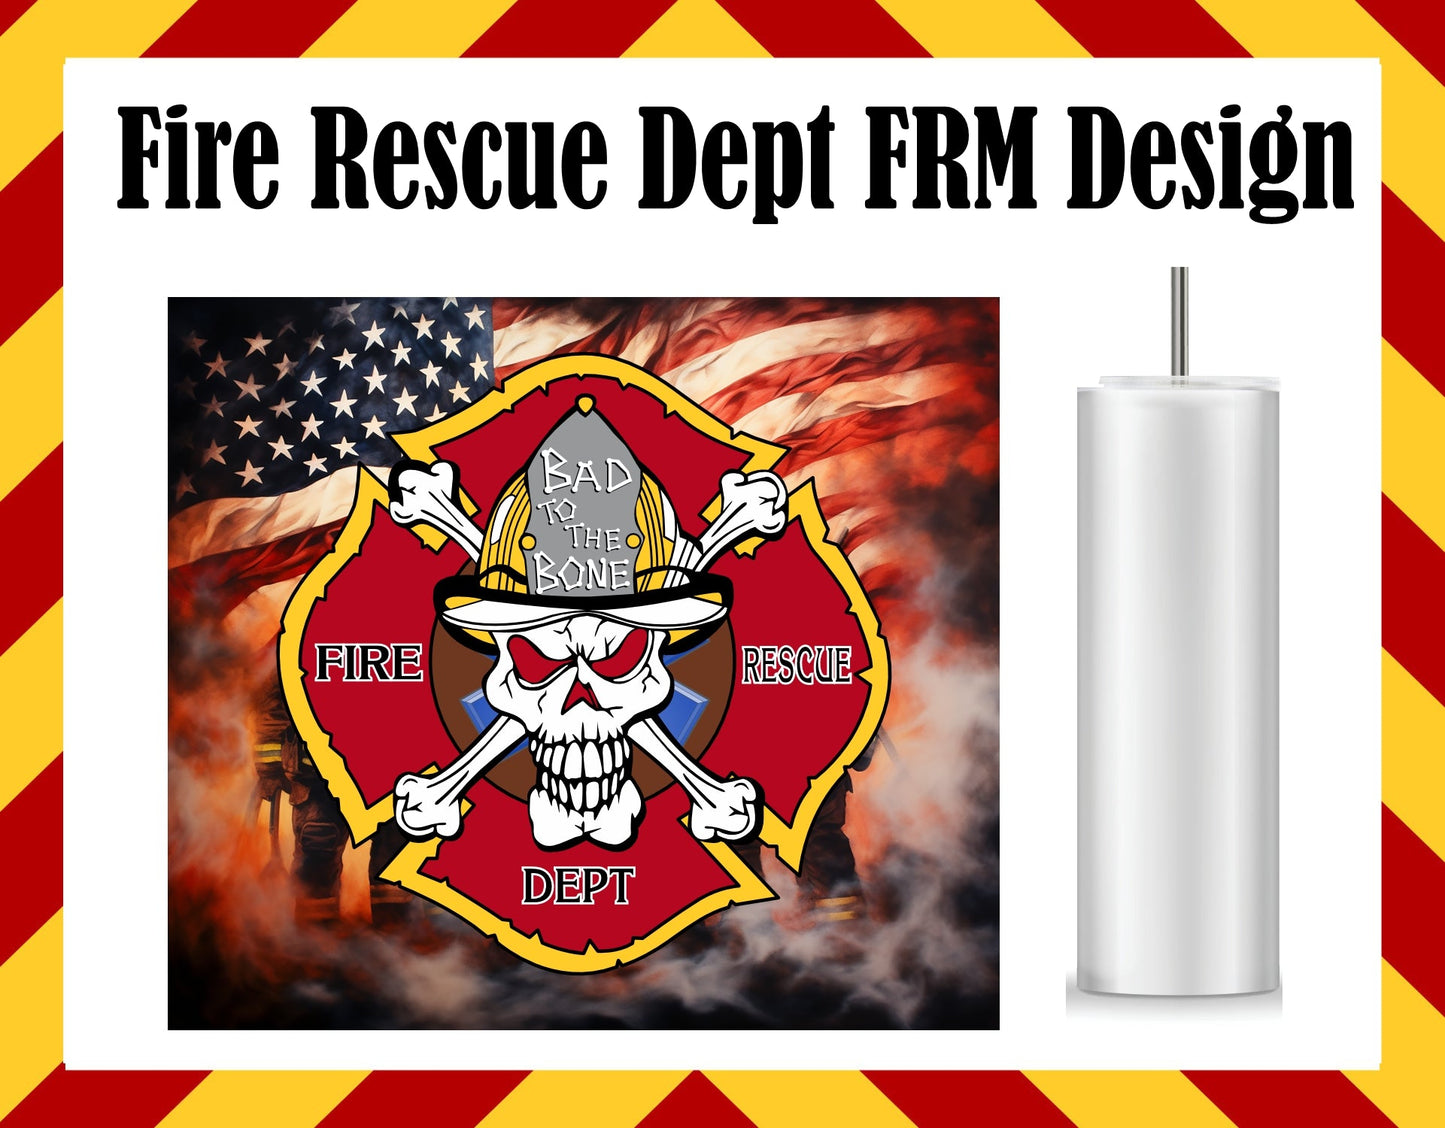 Drink Water Cup - Fire Rescue Dept FRM Design